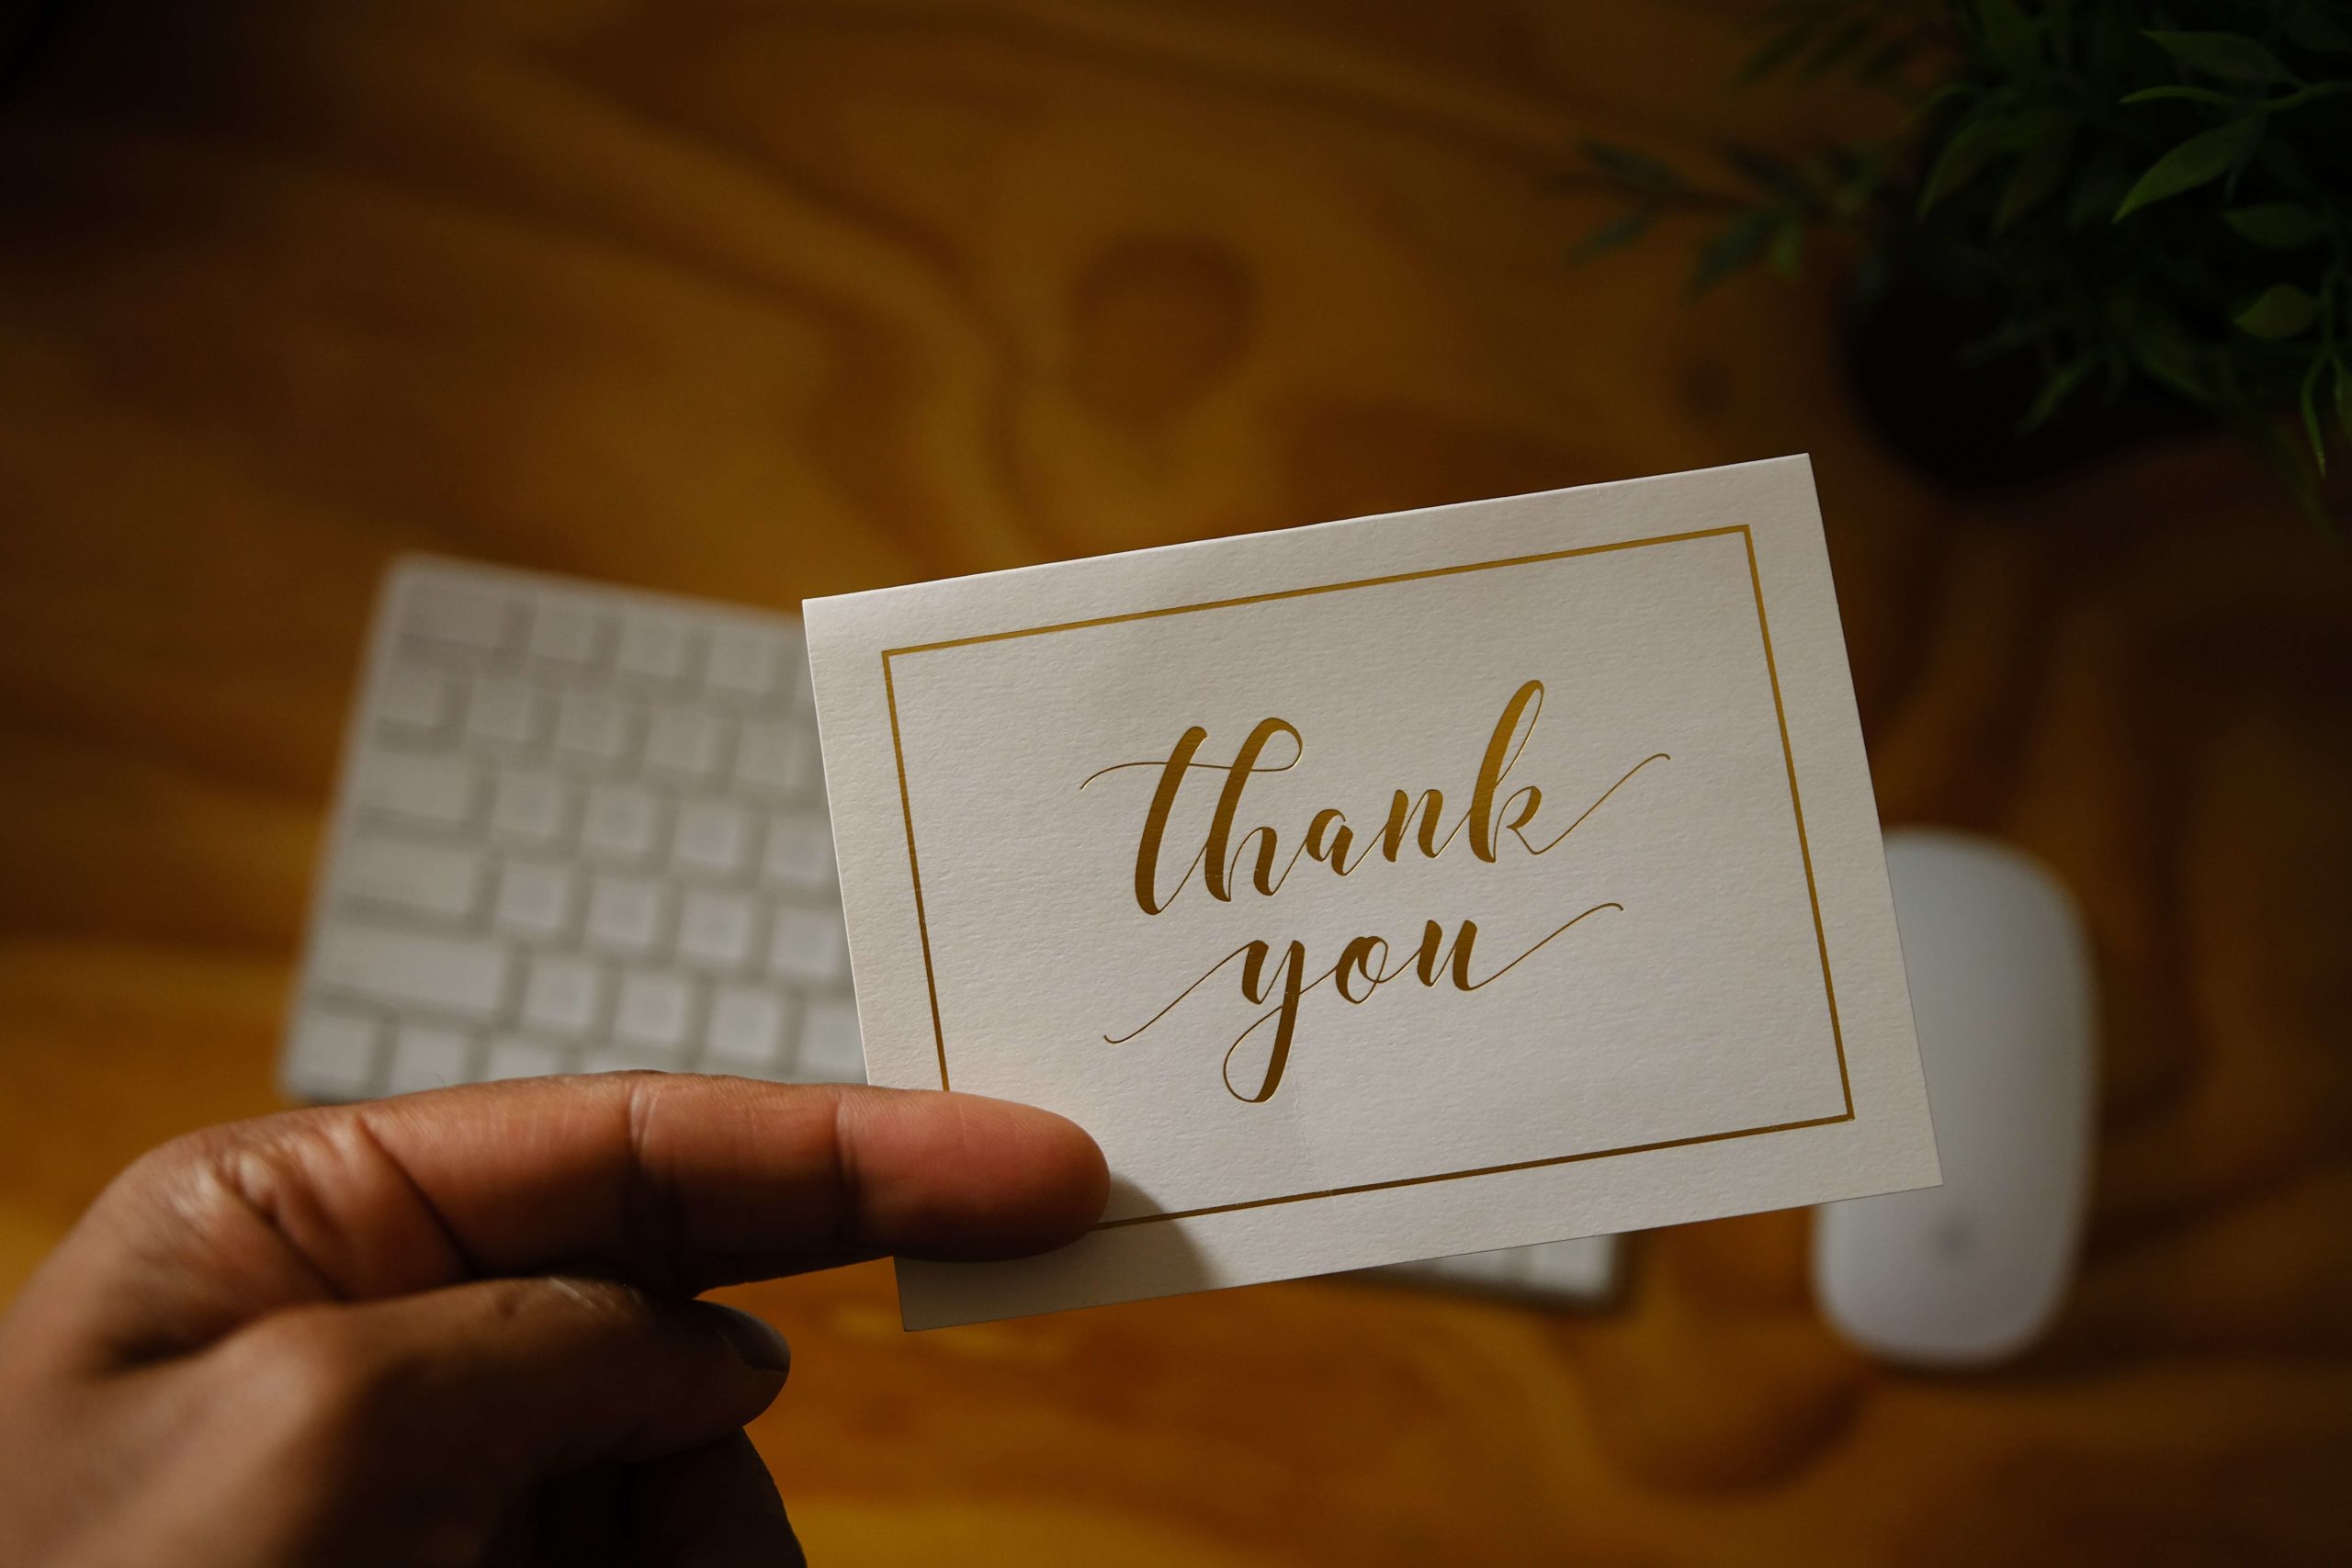 How to Thank a Colleague: A Complete Guide for Employees and